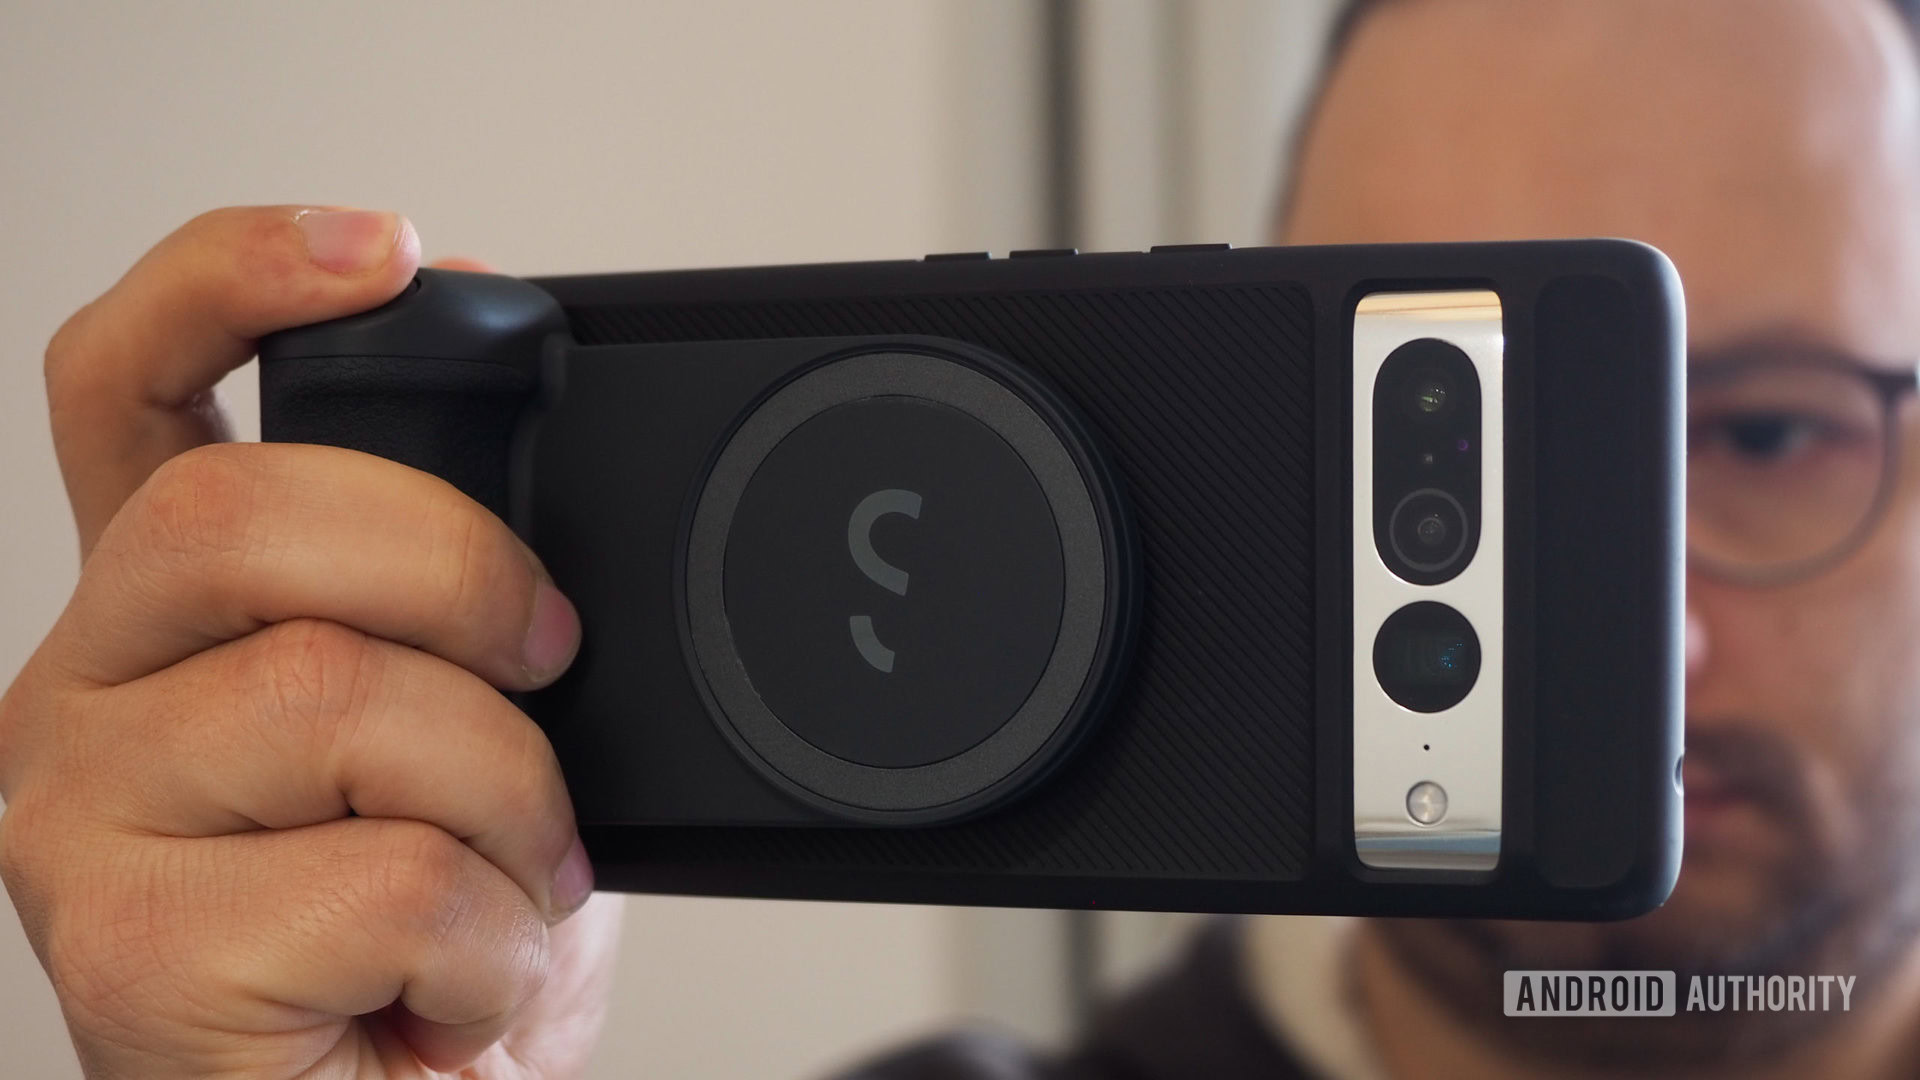 The ShiftCam ProGrip wants to turn your smartphone into the